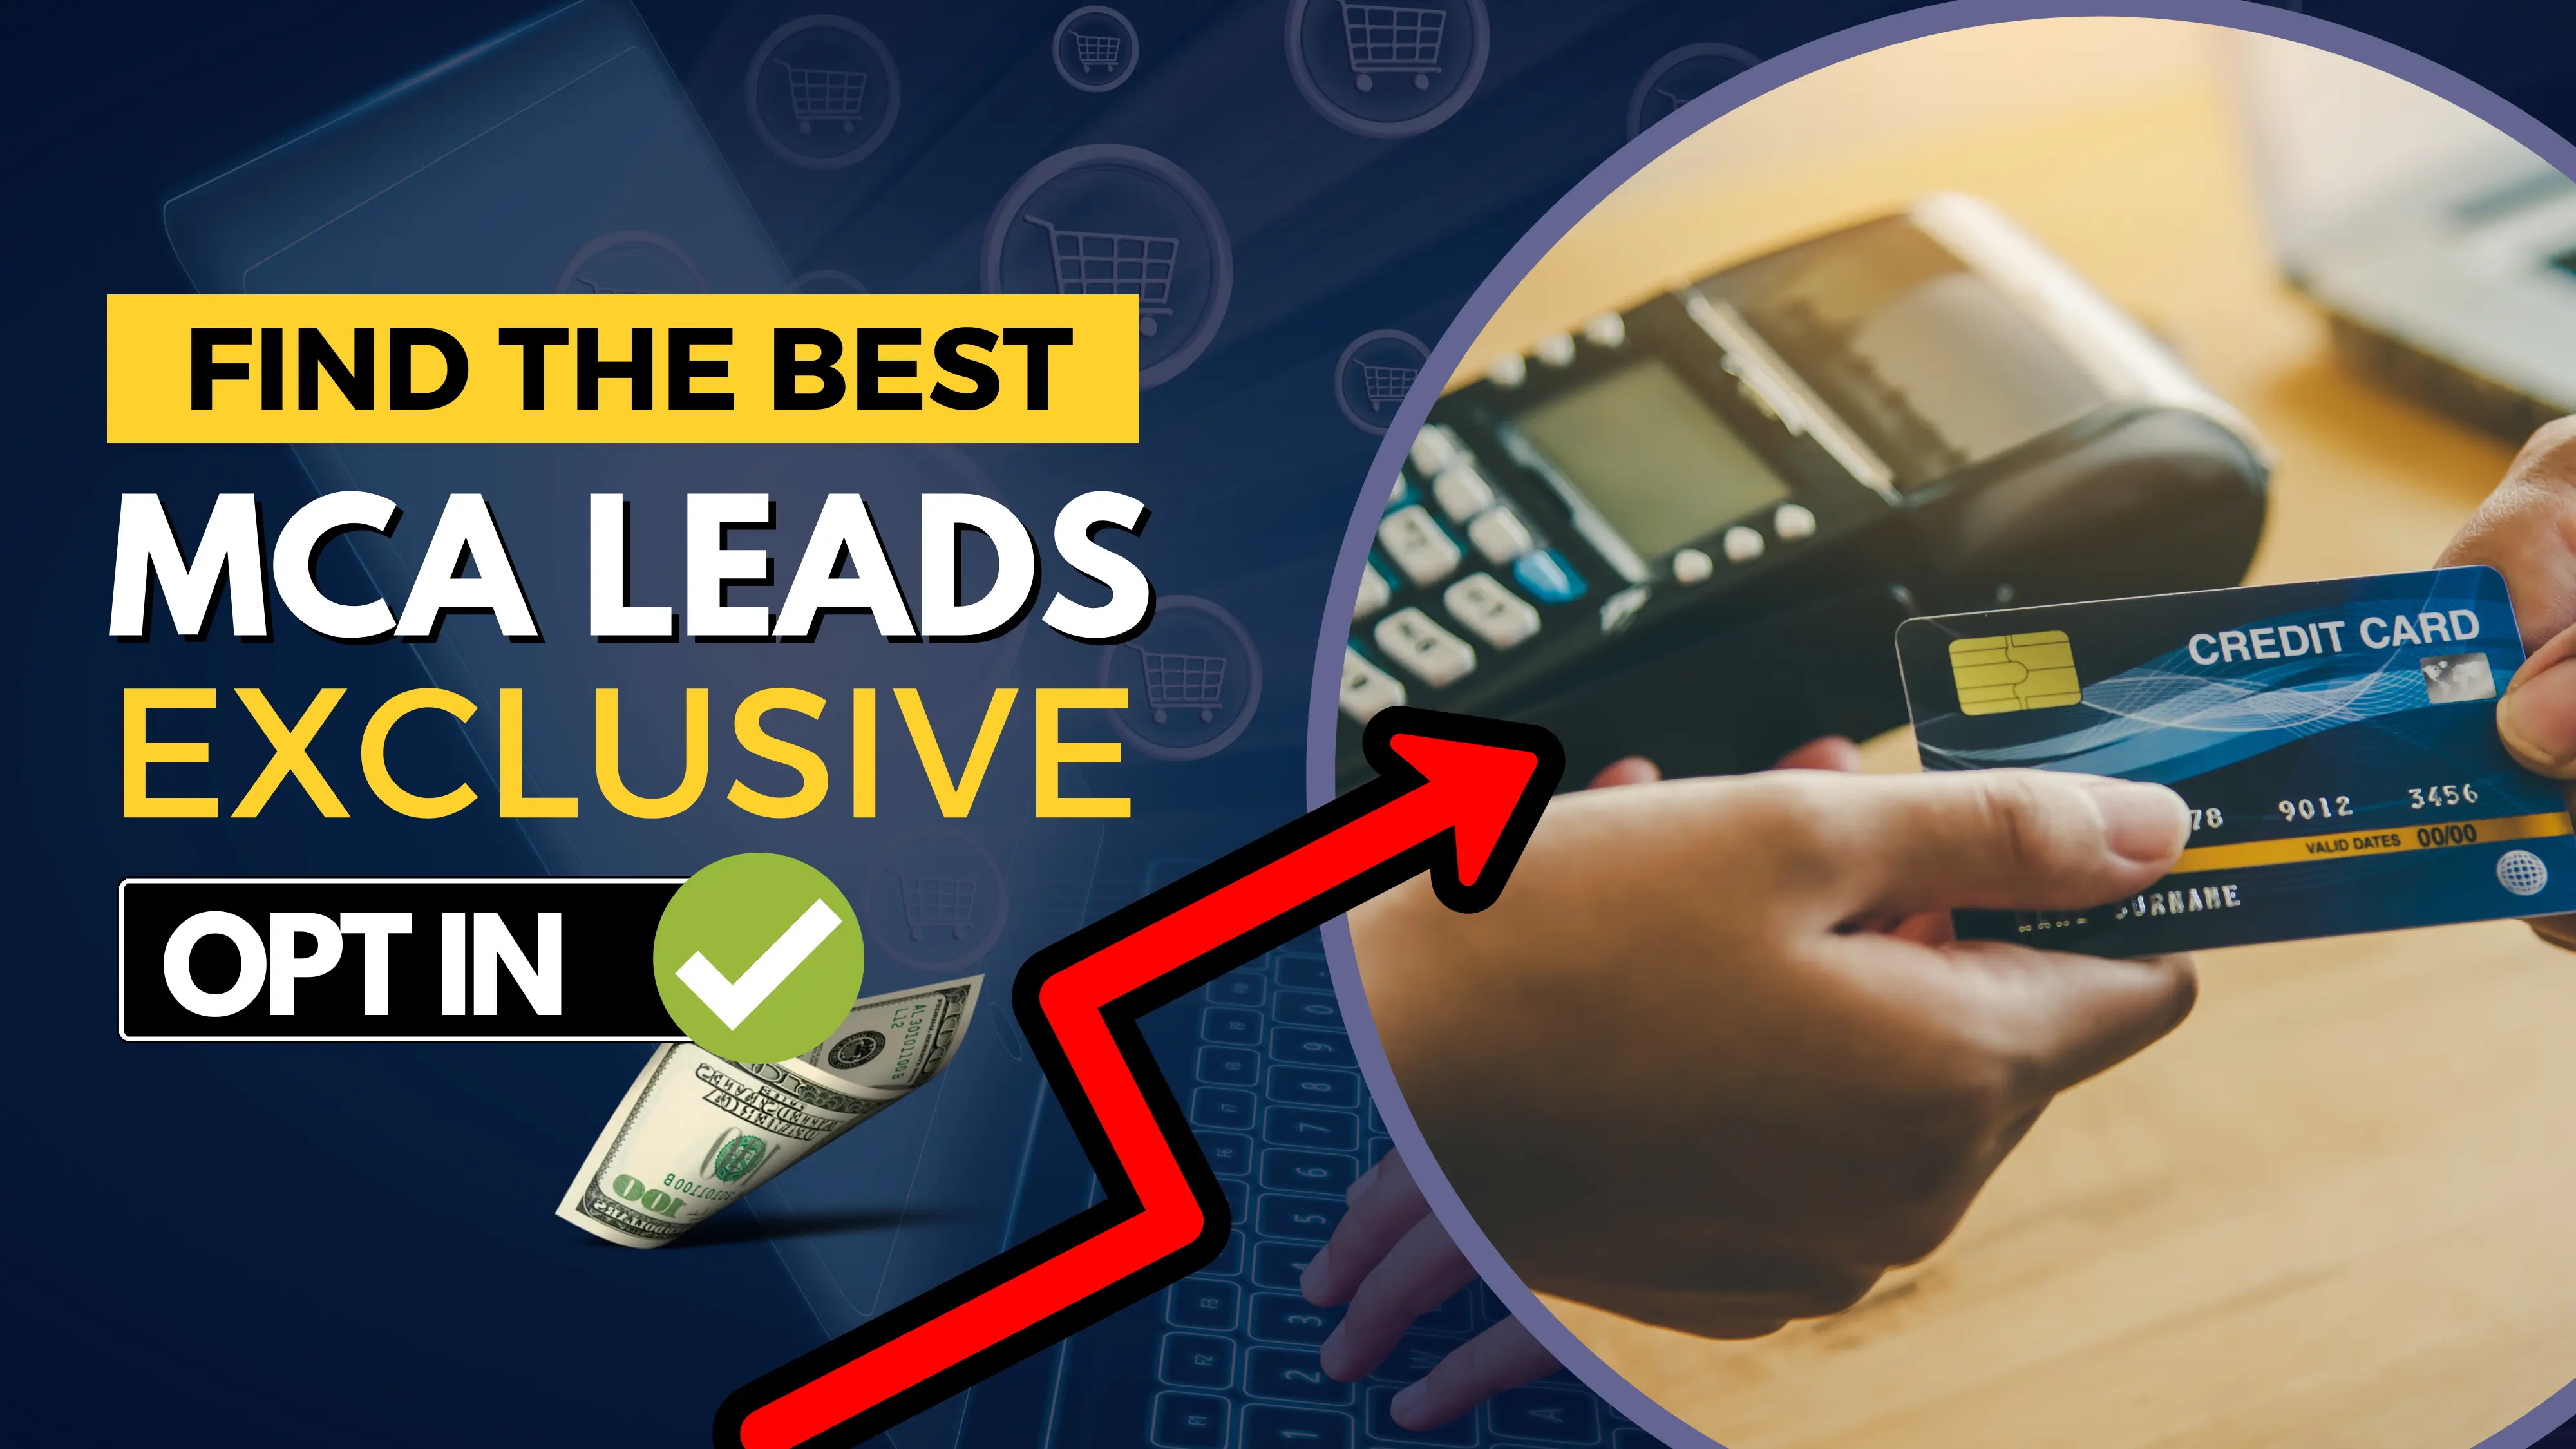 How to get US Merchant Service Leads from Leadscampus